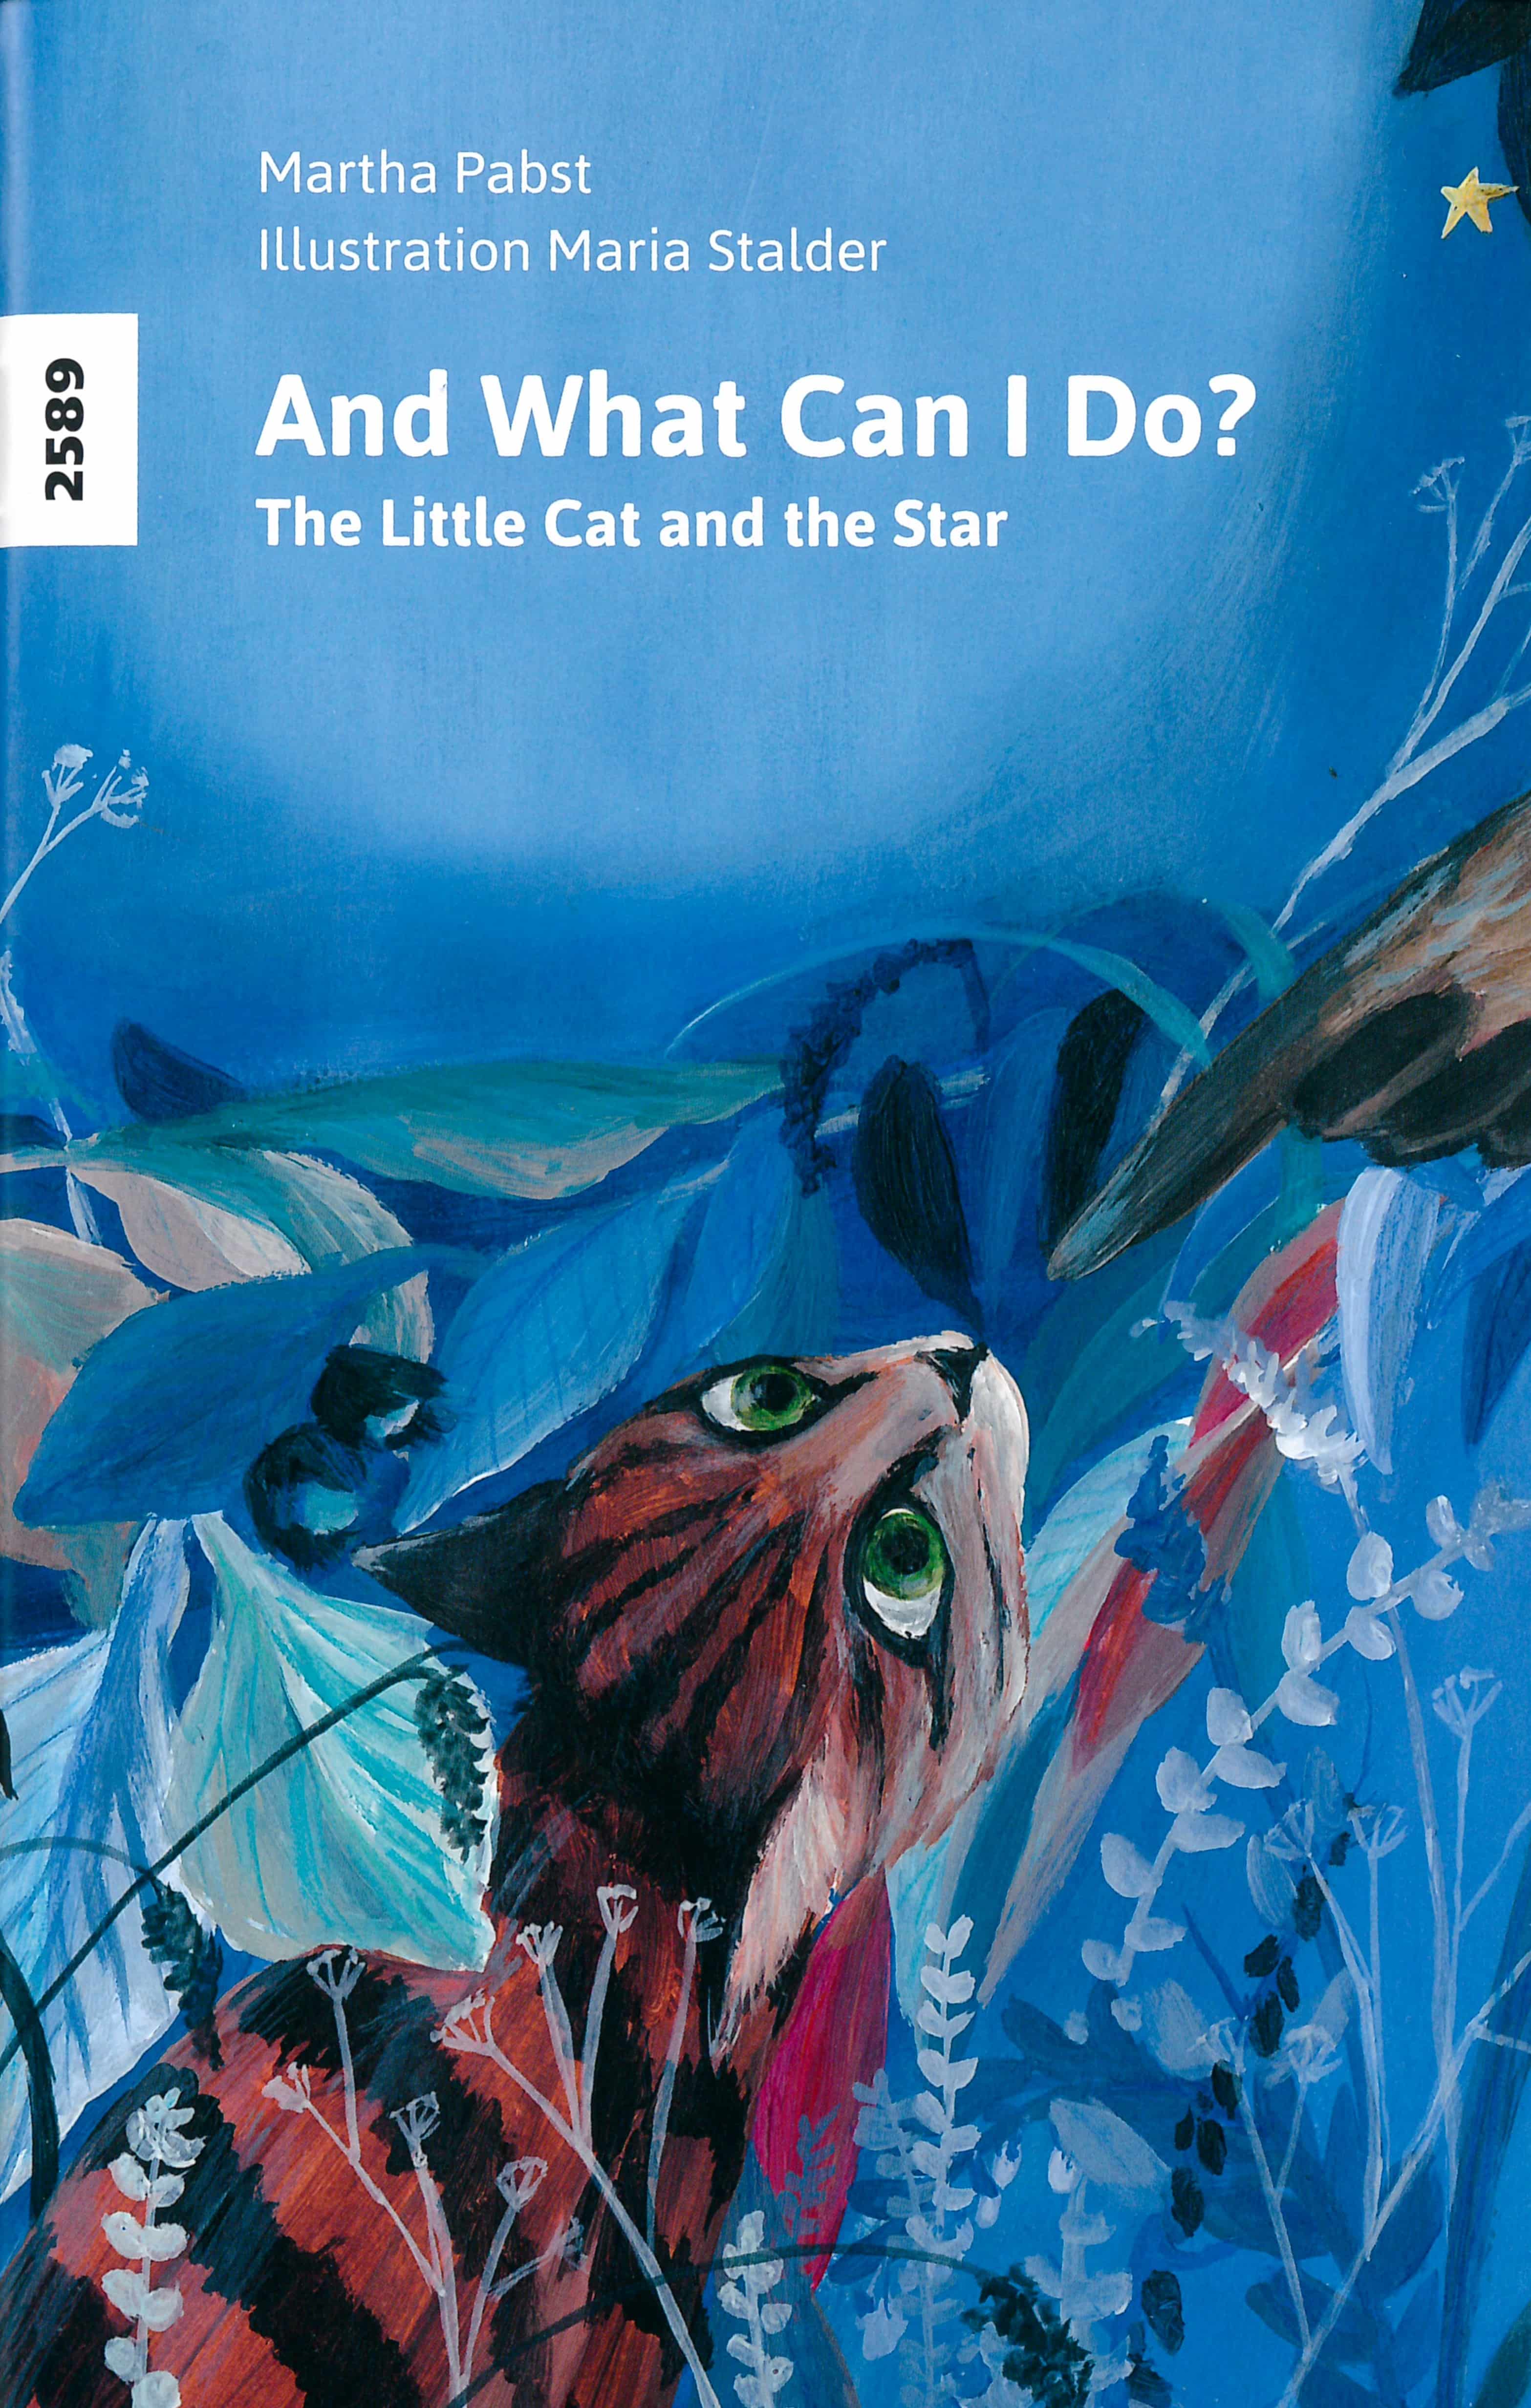 And What Can I Do? – The Little Cat and the Star